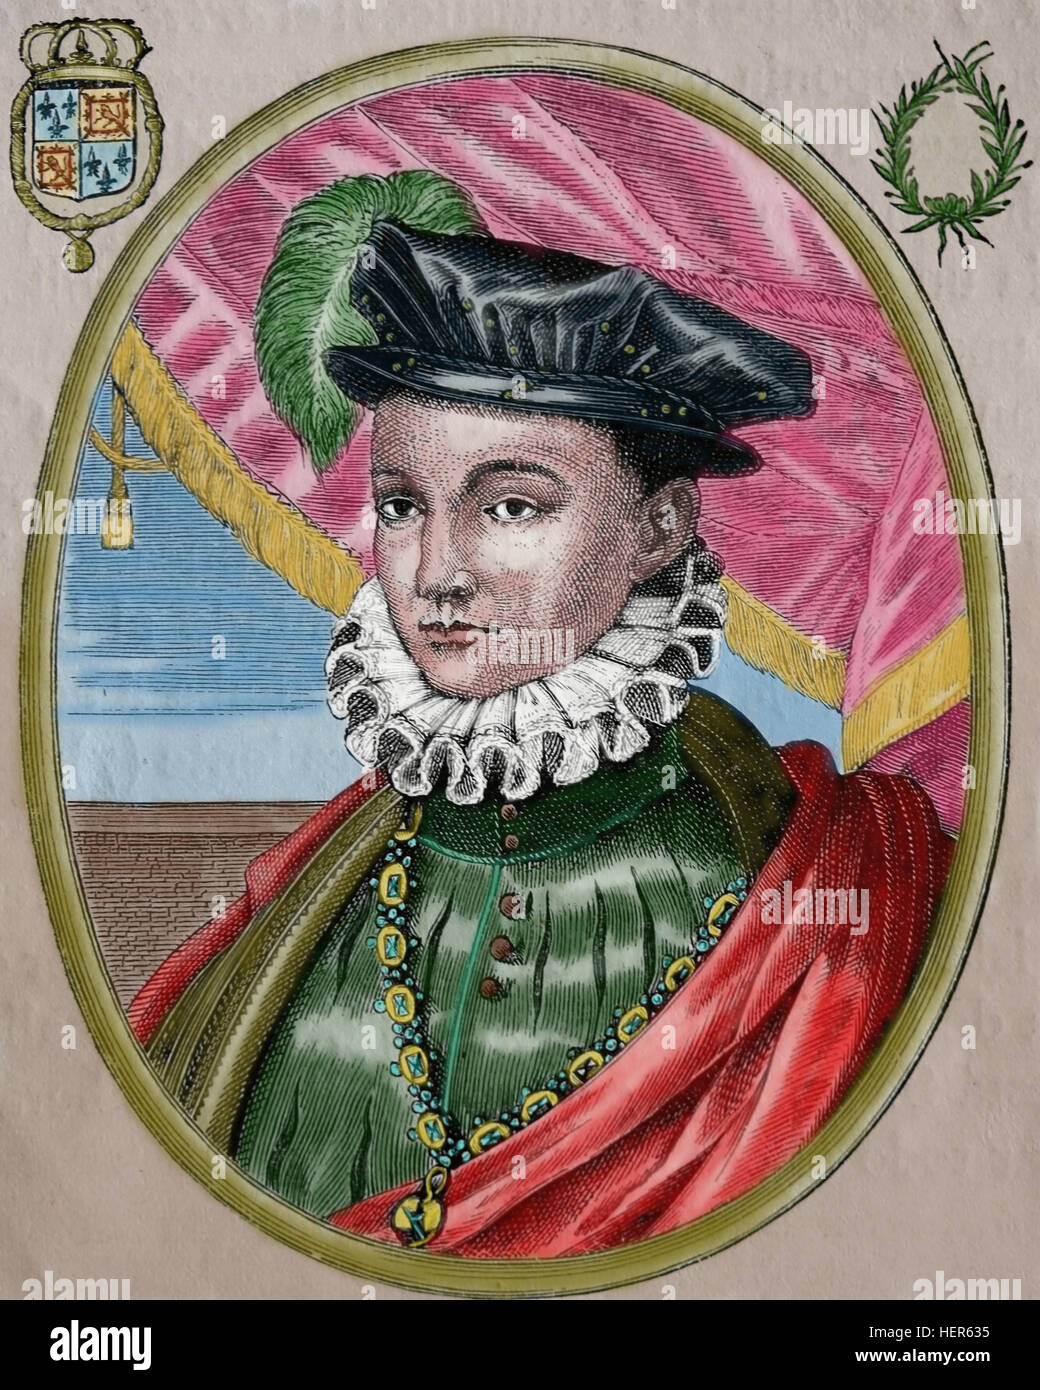 Francis II (1544-1560). King of France from 1559-1560. House of Valois-Angouleme. Engraving, 1884. Color. Stock Photo